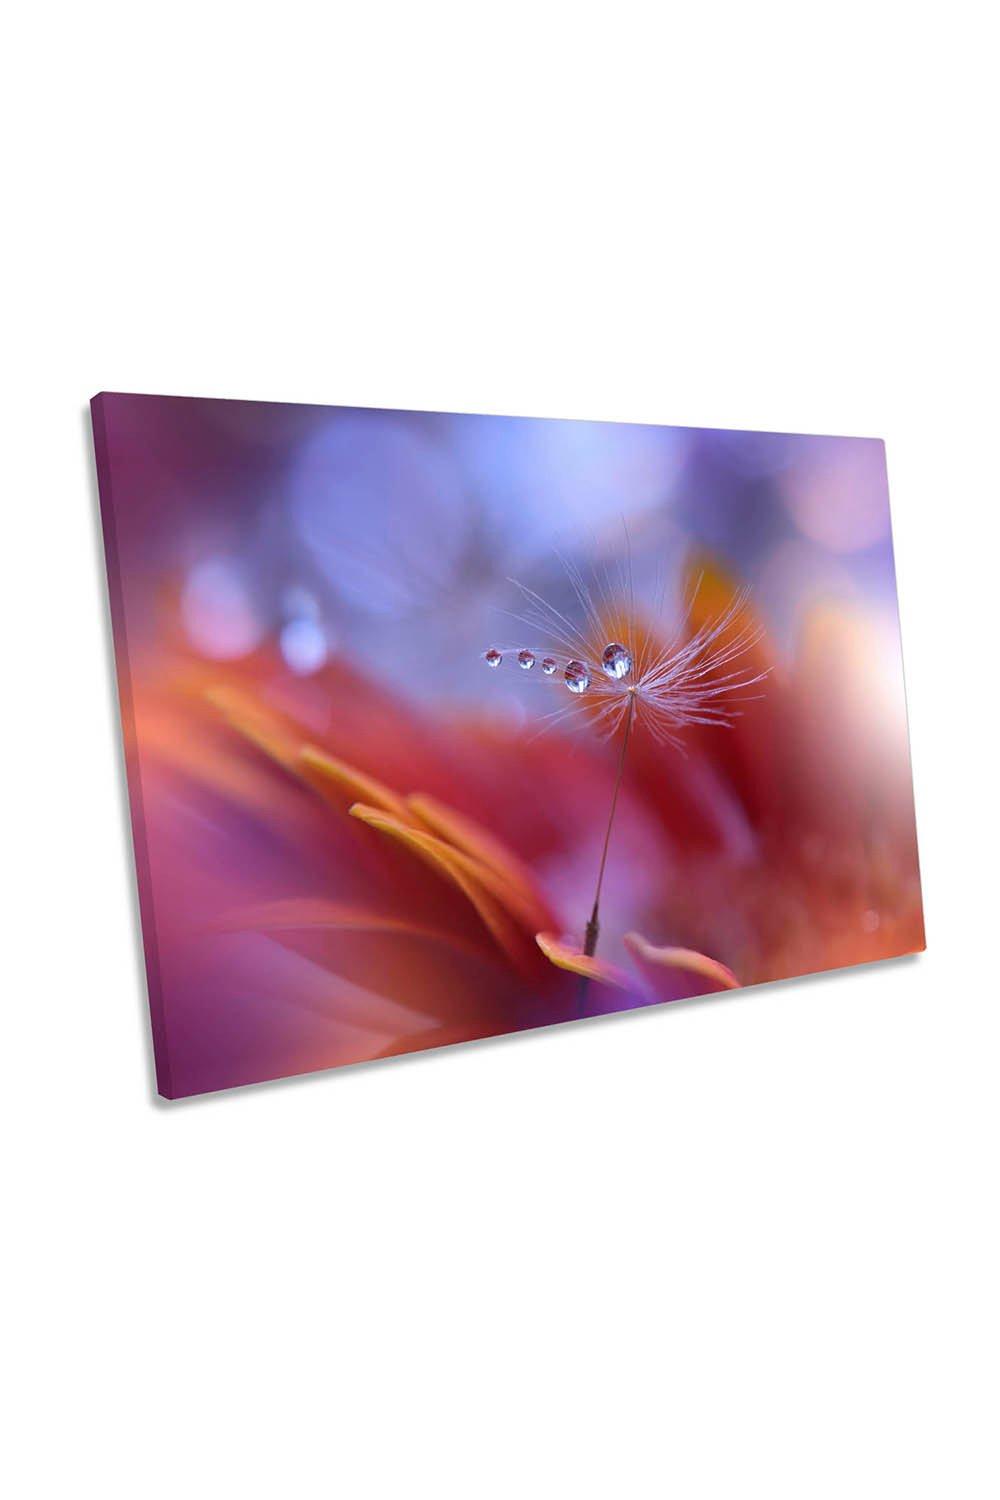 Dance in the Light Floral Flower Canvas Wall Art Picture Print